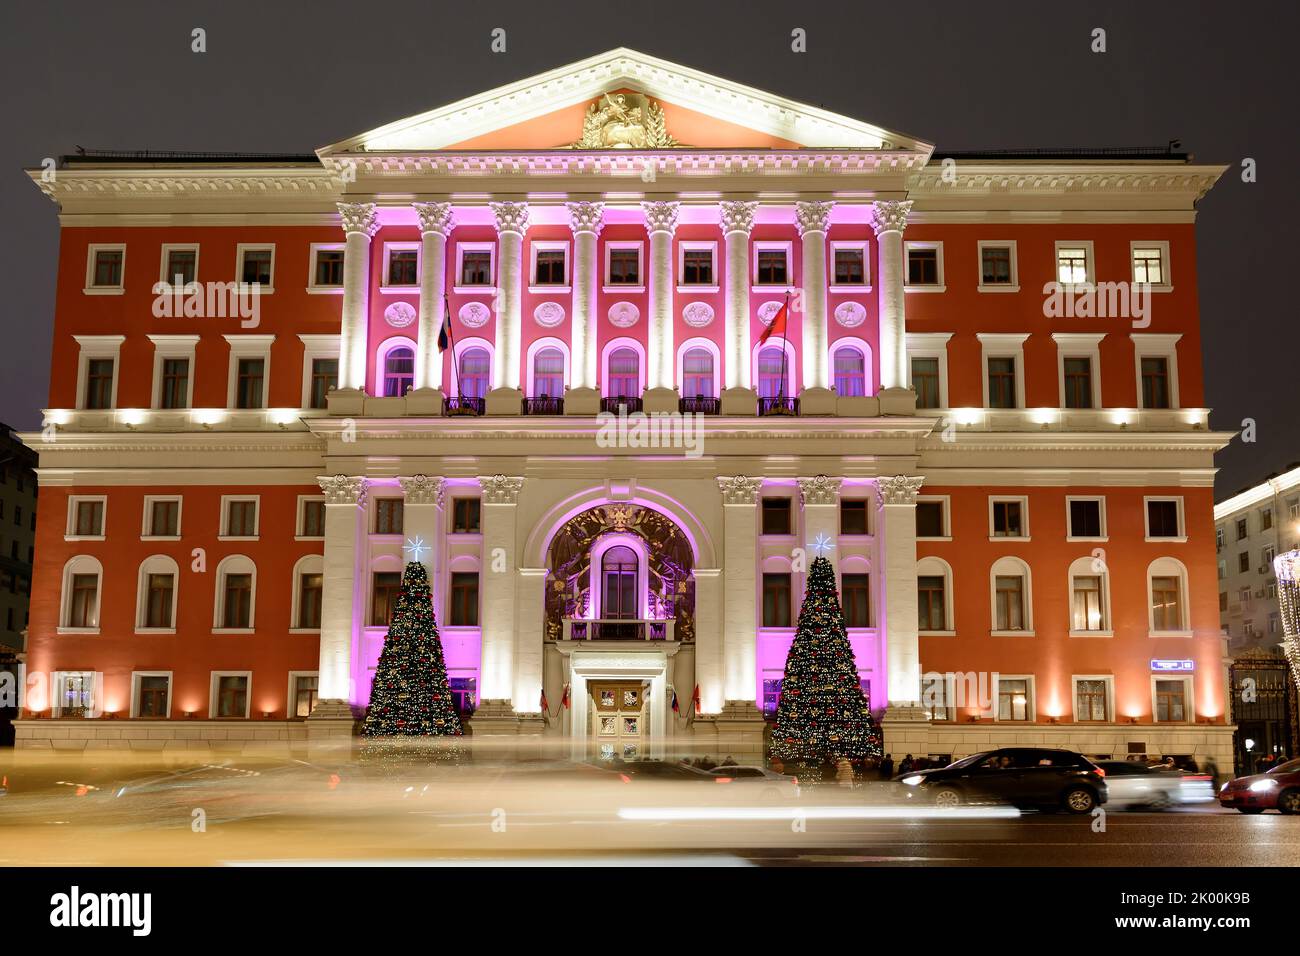 Night view of the Mayor's office building on Tverskaya street in Moscow, Russia. Stock Photo